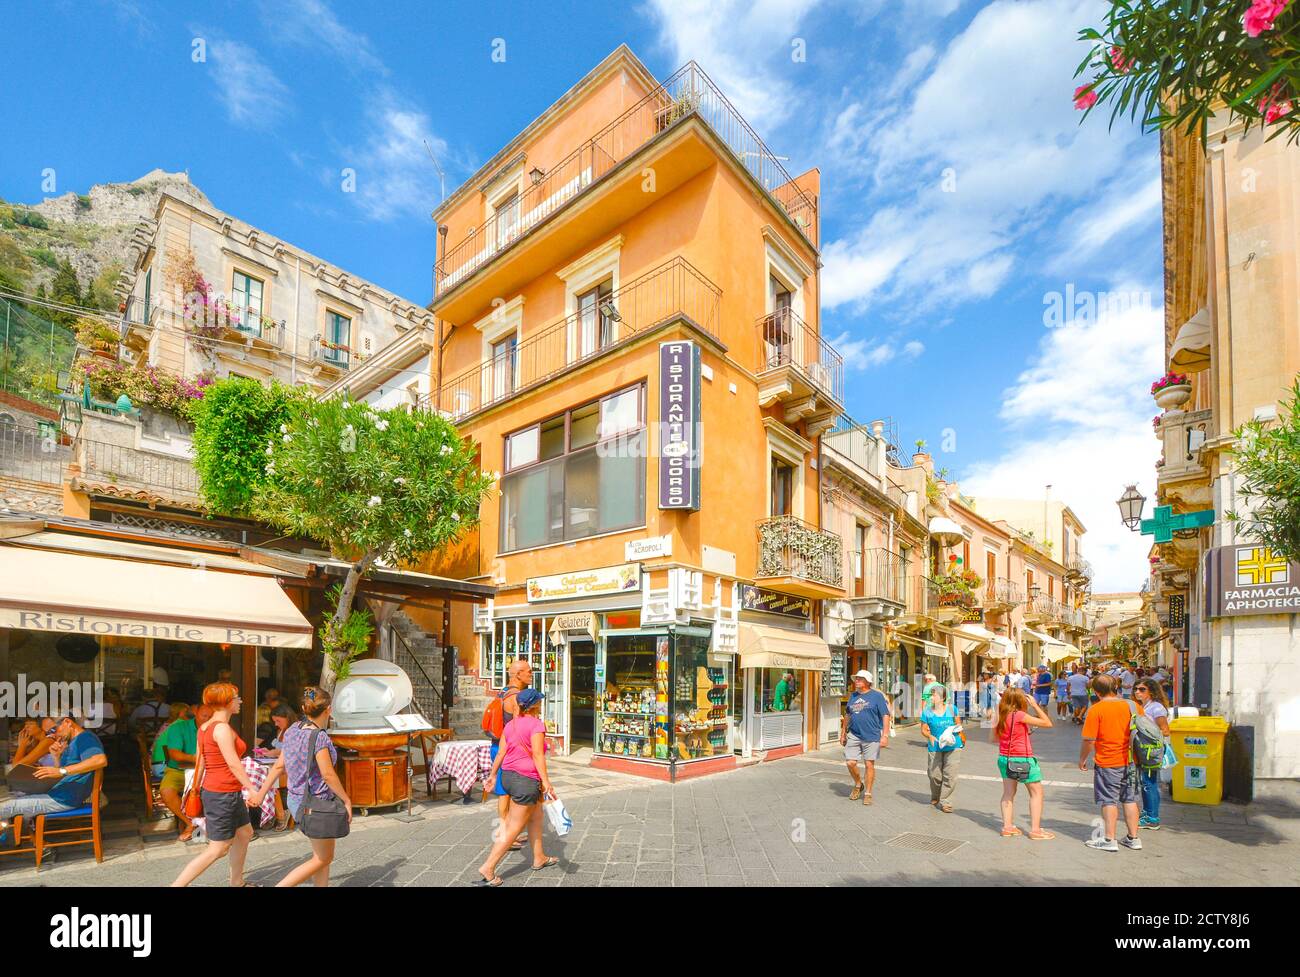 Busy section of Corso Umberto in Taormina, Italy on the Mediterranean island of Sicily on a warm summer day with crowds of tourists Stock Photo